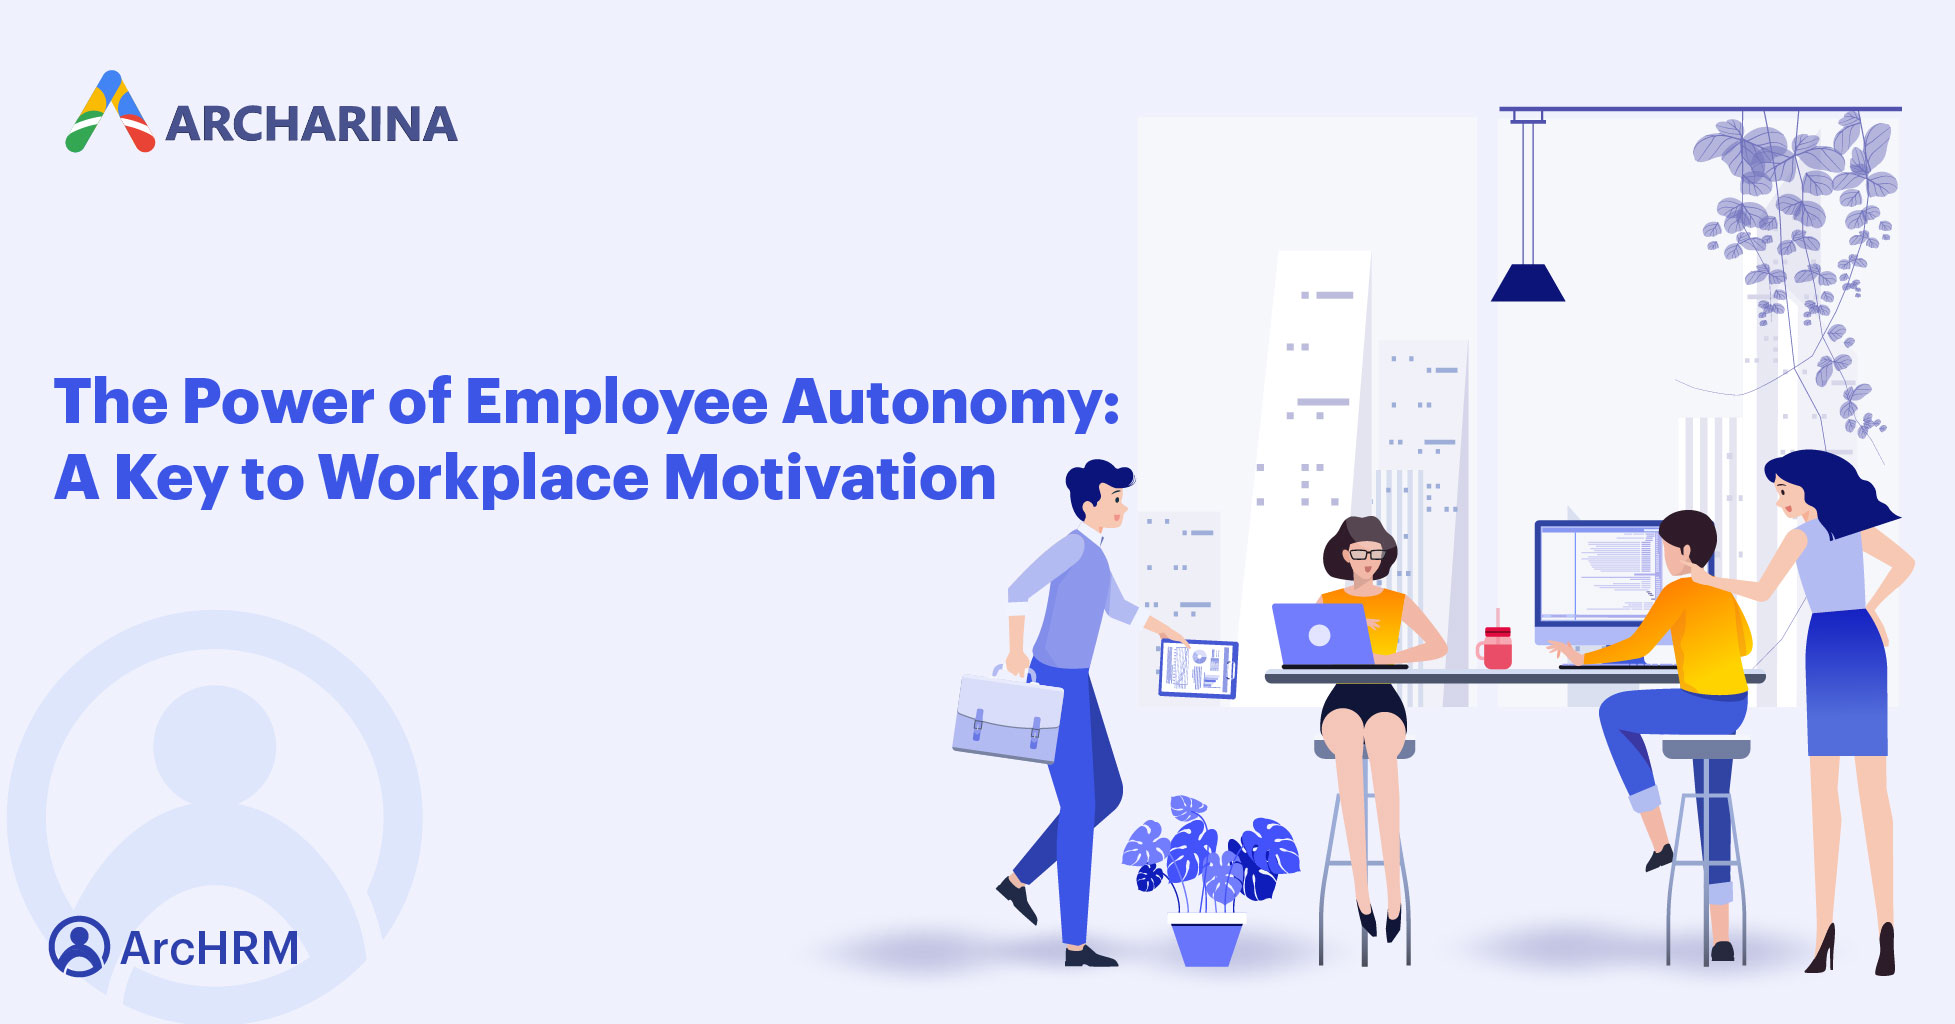 The Power of Employee Autonomy: A Key to Workplace Motivation